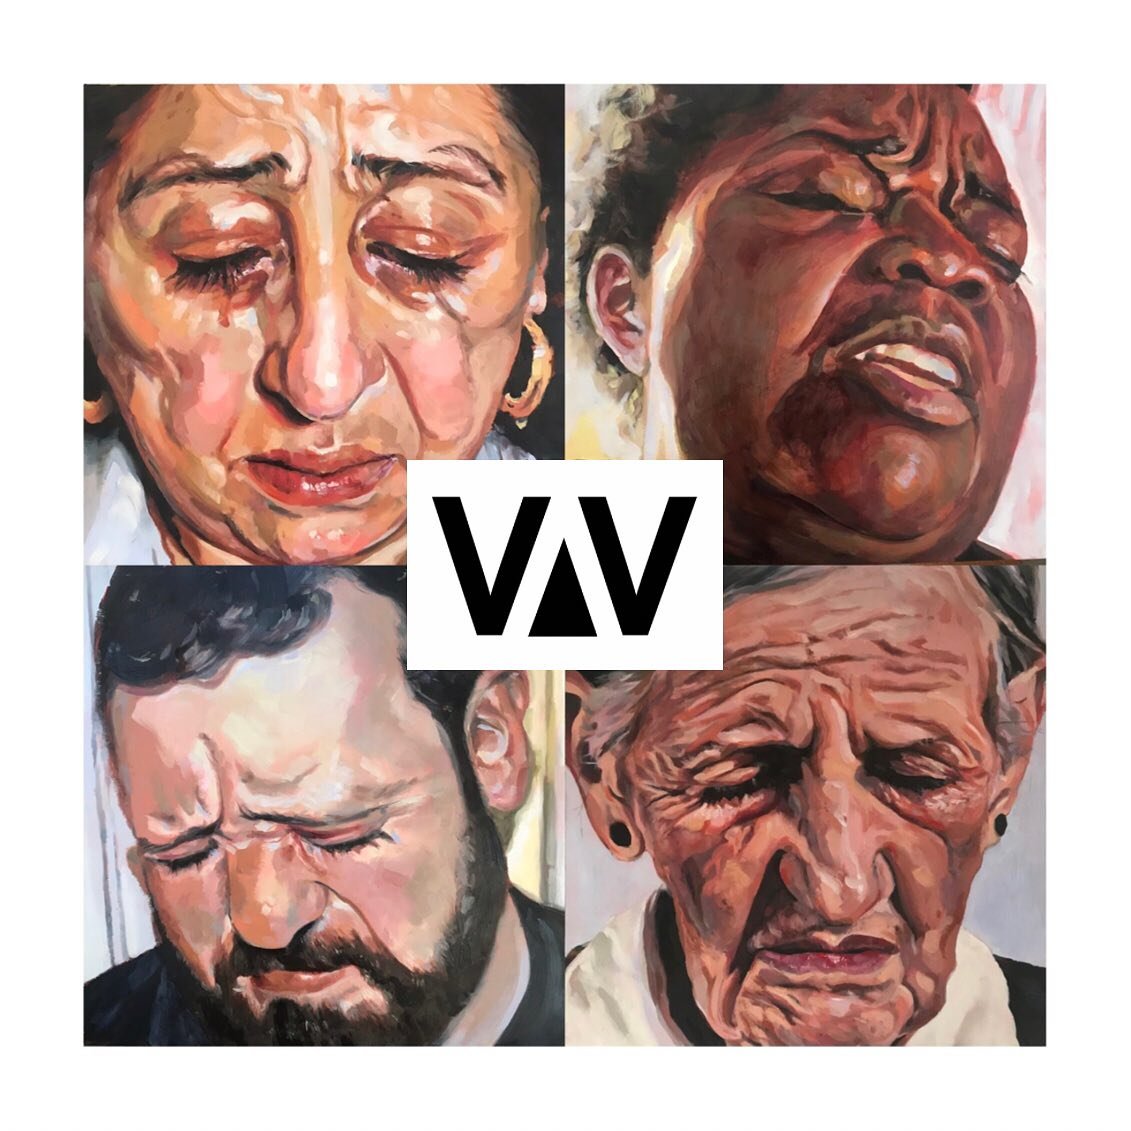 Really excited to be showing 5 pieces of work with @vvarts.studio @alfiesbarlocale in #shoreditch 
The show opens today and runs until 2nd May.

The private view is this Saturday 13th April from 7pm
📍 125-127 Bethnal Green Rd. London E2 7DG
🚆 Close